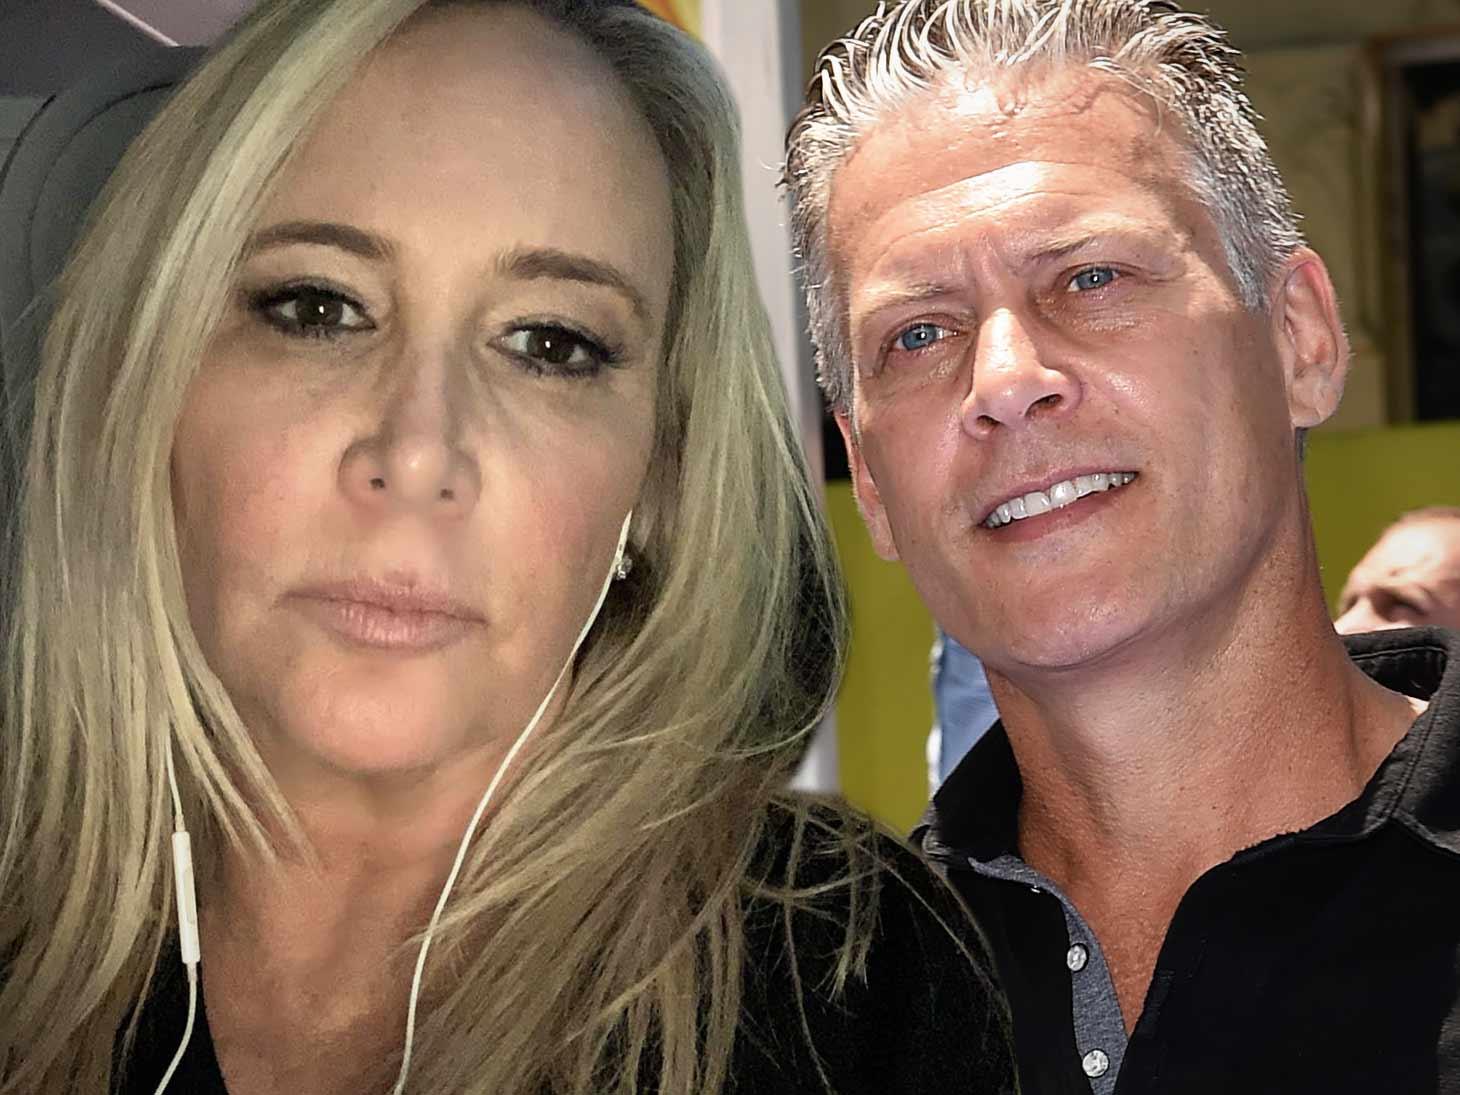 ‘RHOC’ Star Shannon Beador’s Estranged Husband Seeks Order to Keep Her From Drinking Around the Kids